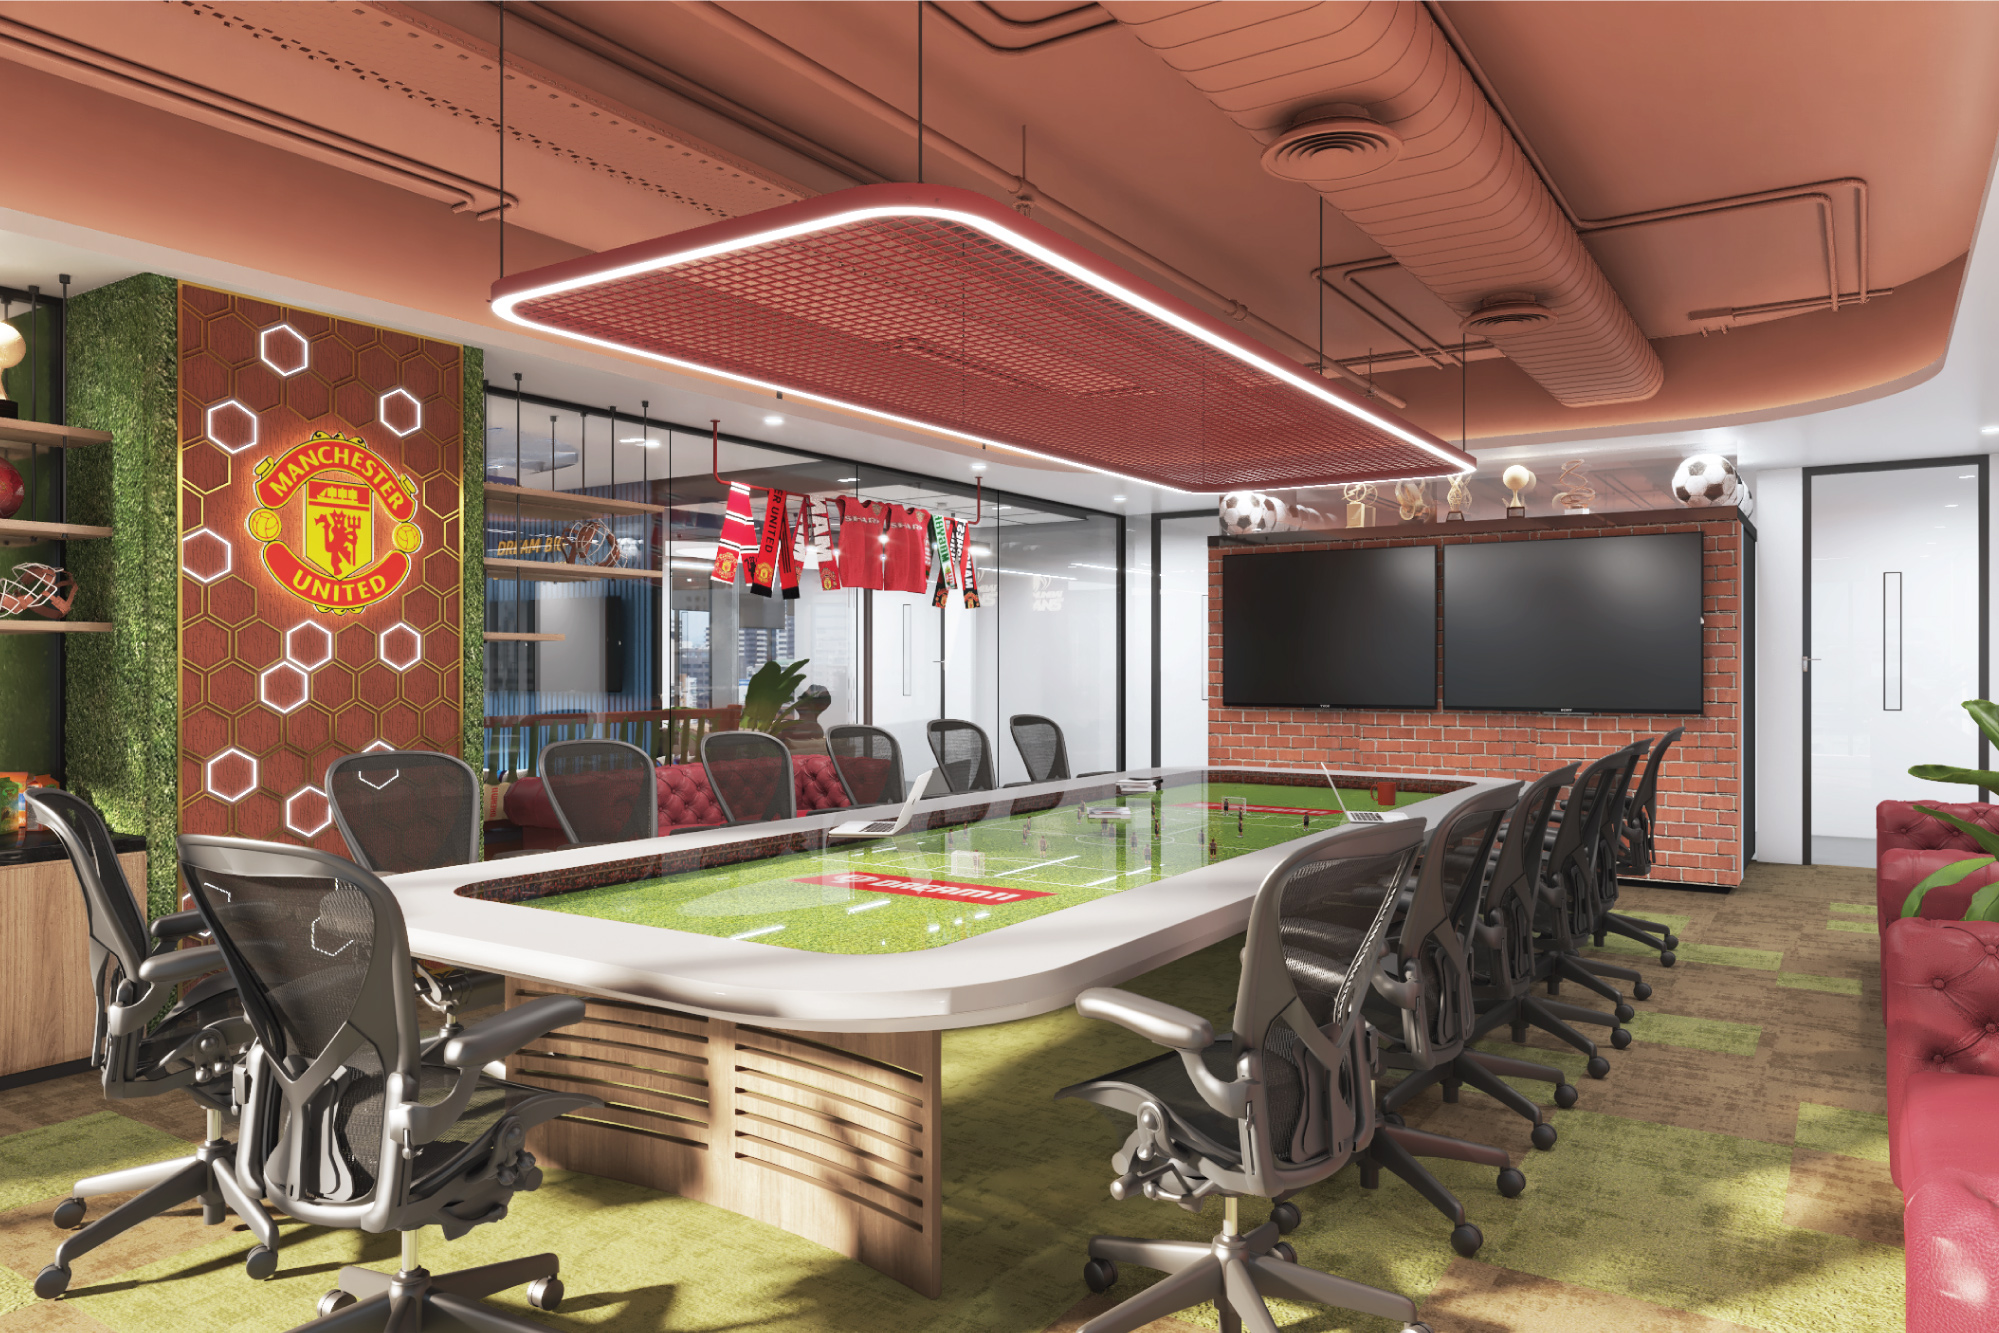 corporate workplace design driven by the brand's purpose, mission and values